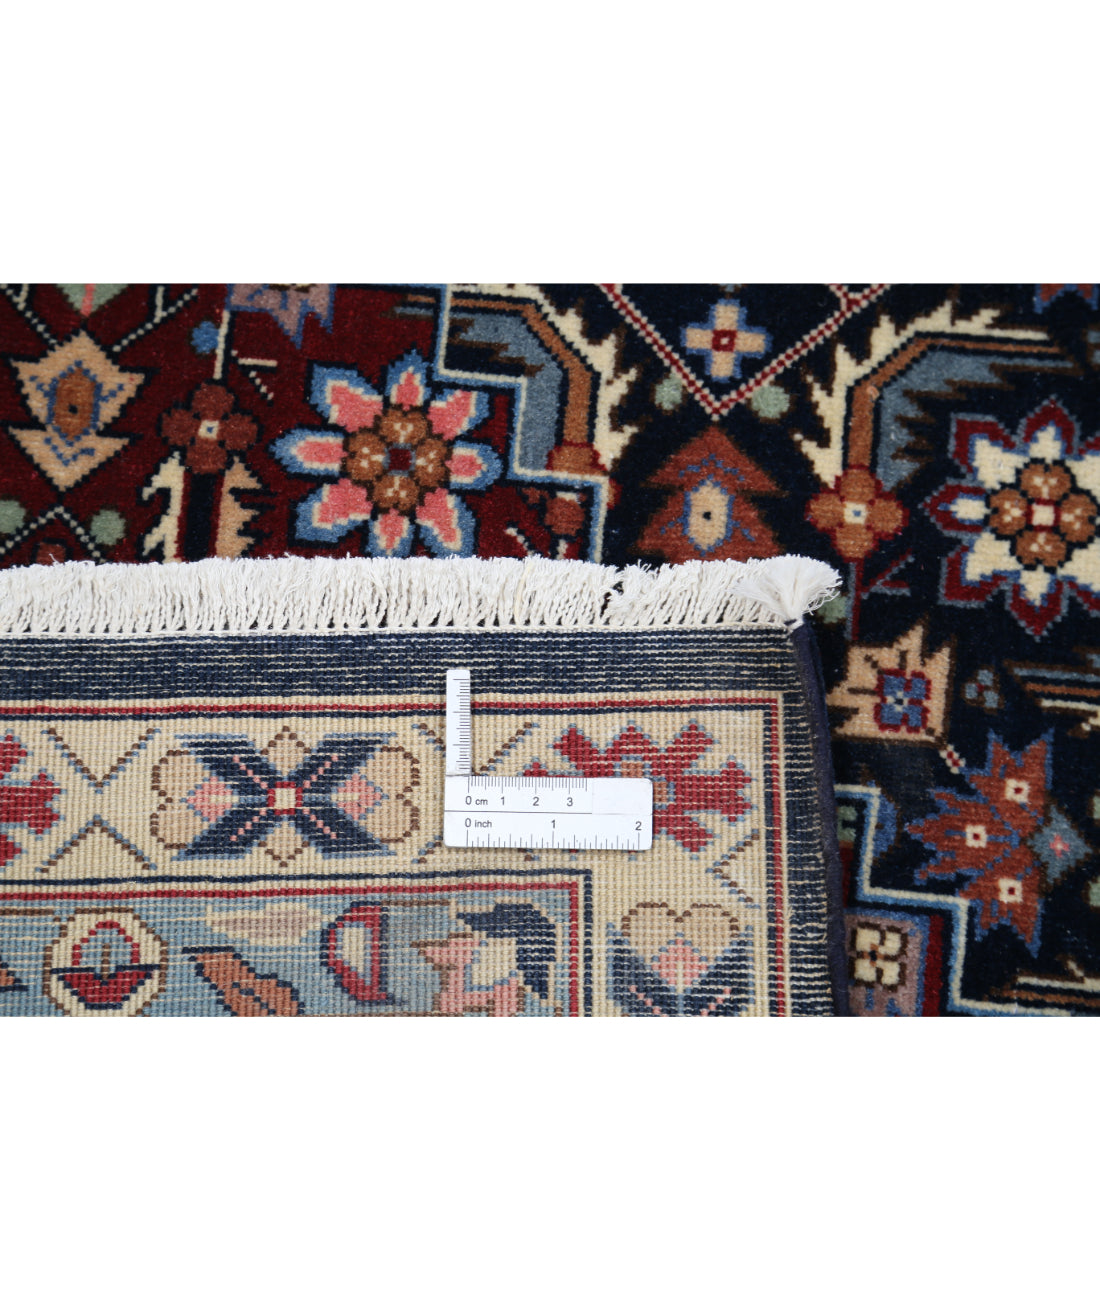 Hand Knotted Heritage Persian Style Wool Rug - 8'0'' x 10'0'' 8' 0" X 10' 0" (244 X 305) / Blue / Red